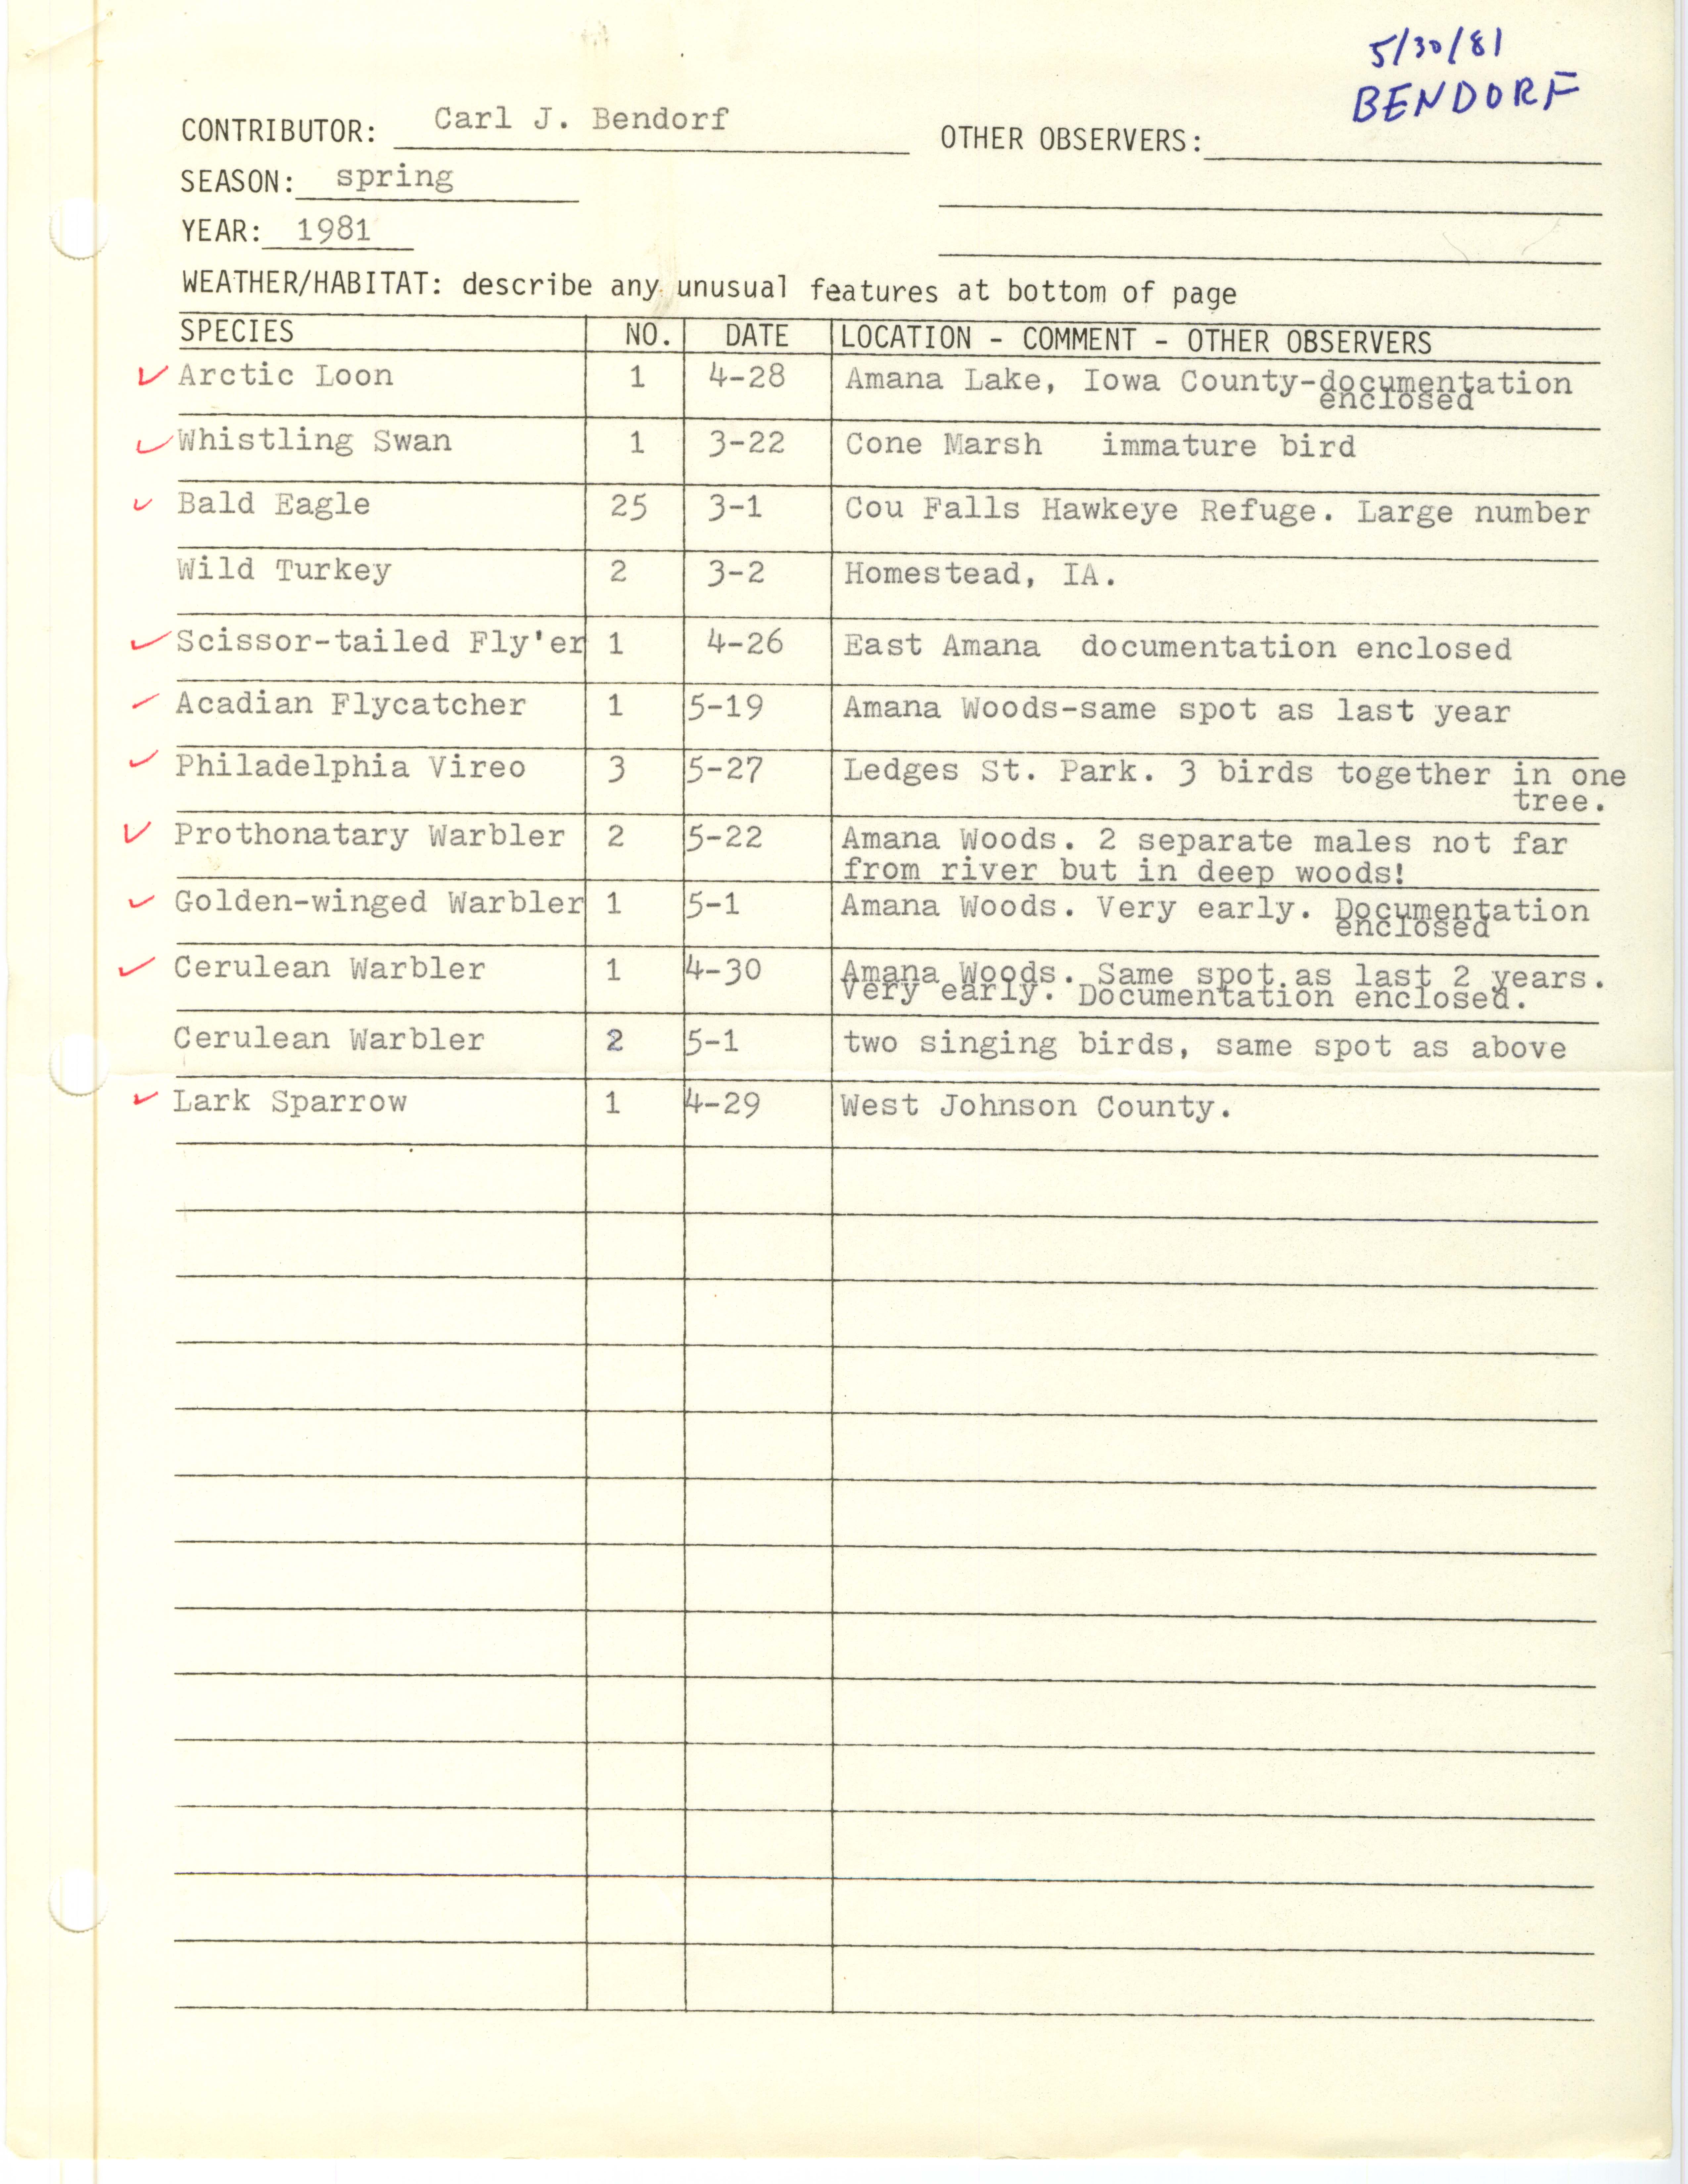 Annotated bird sighting list for spring 1981 compiled by Carl J. Bendorf